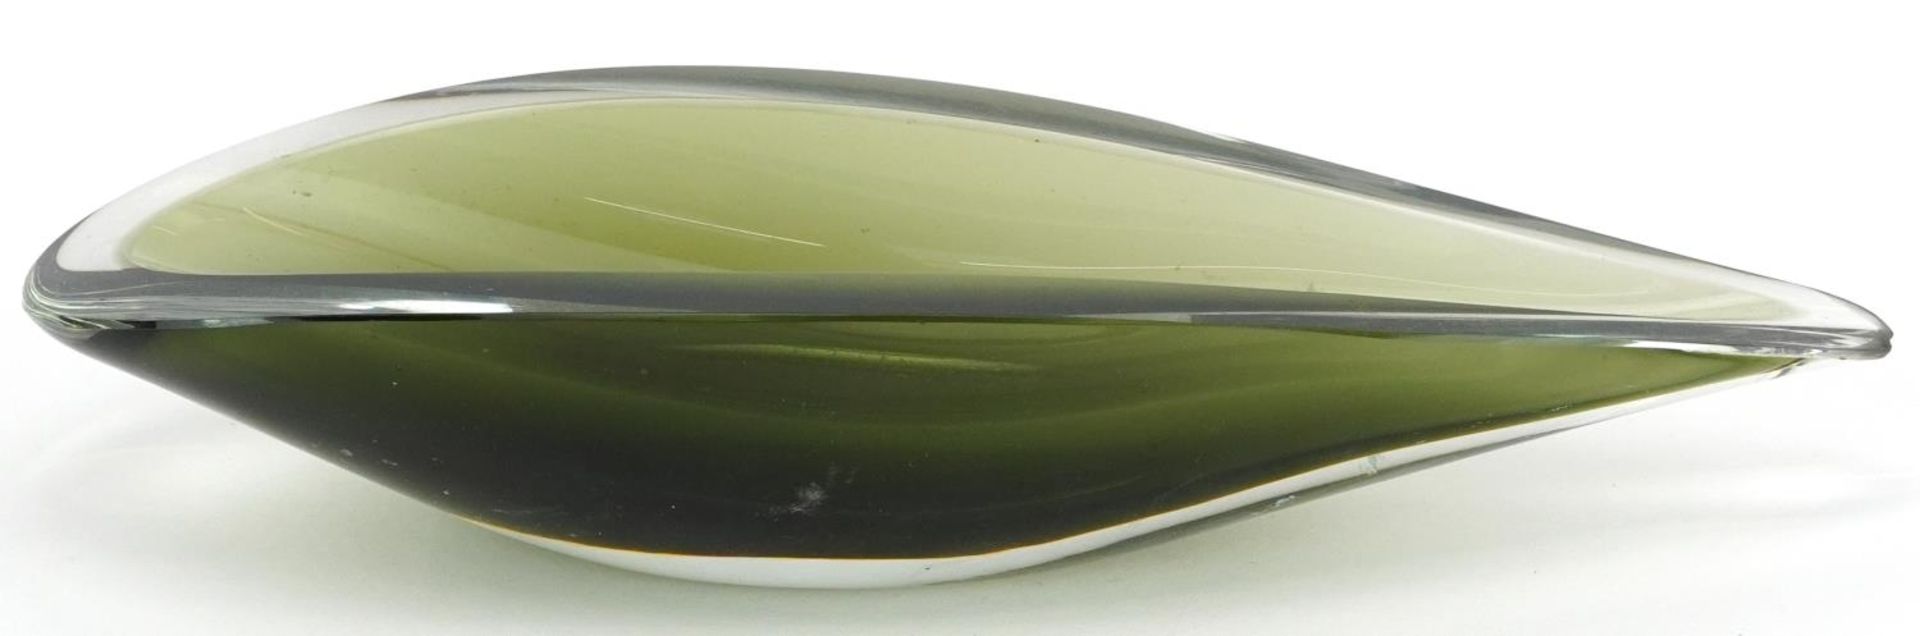 Scandinavian green glass dish, indistinctly signed to the base, 23.5cm wide - Image 2 of 5